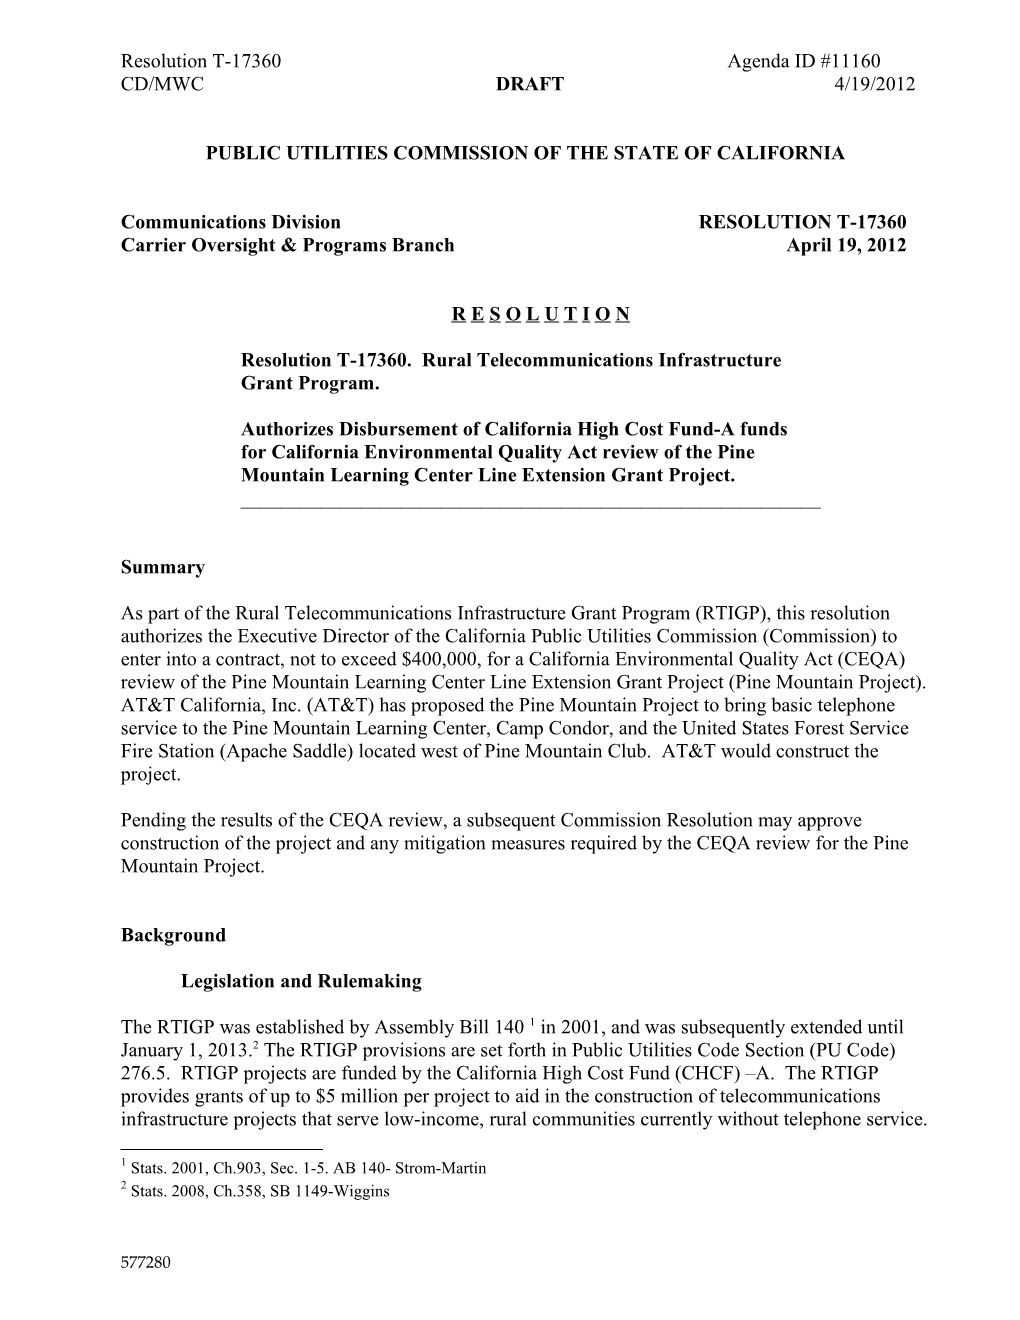 Public Utilities Commission of the State of California s96